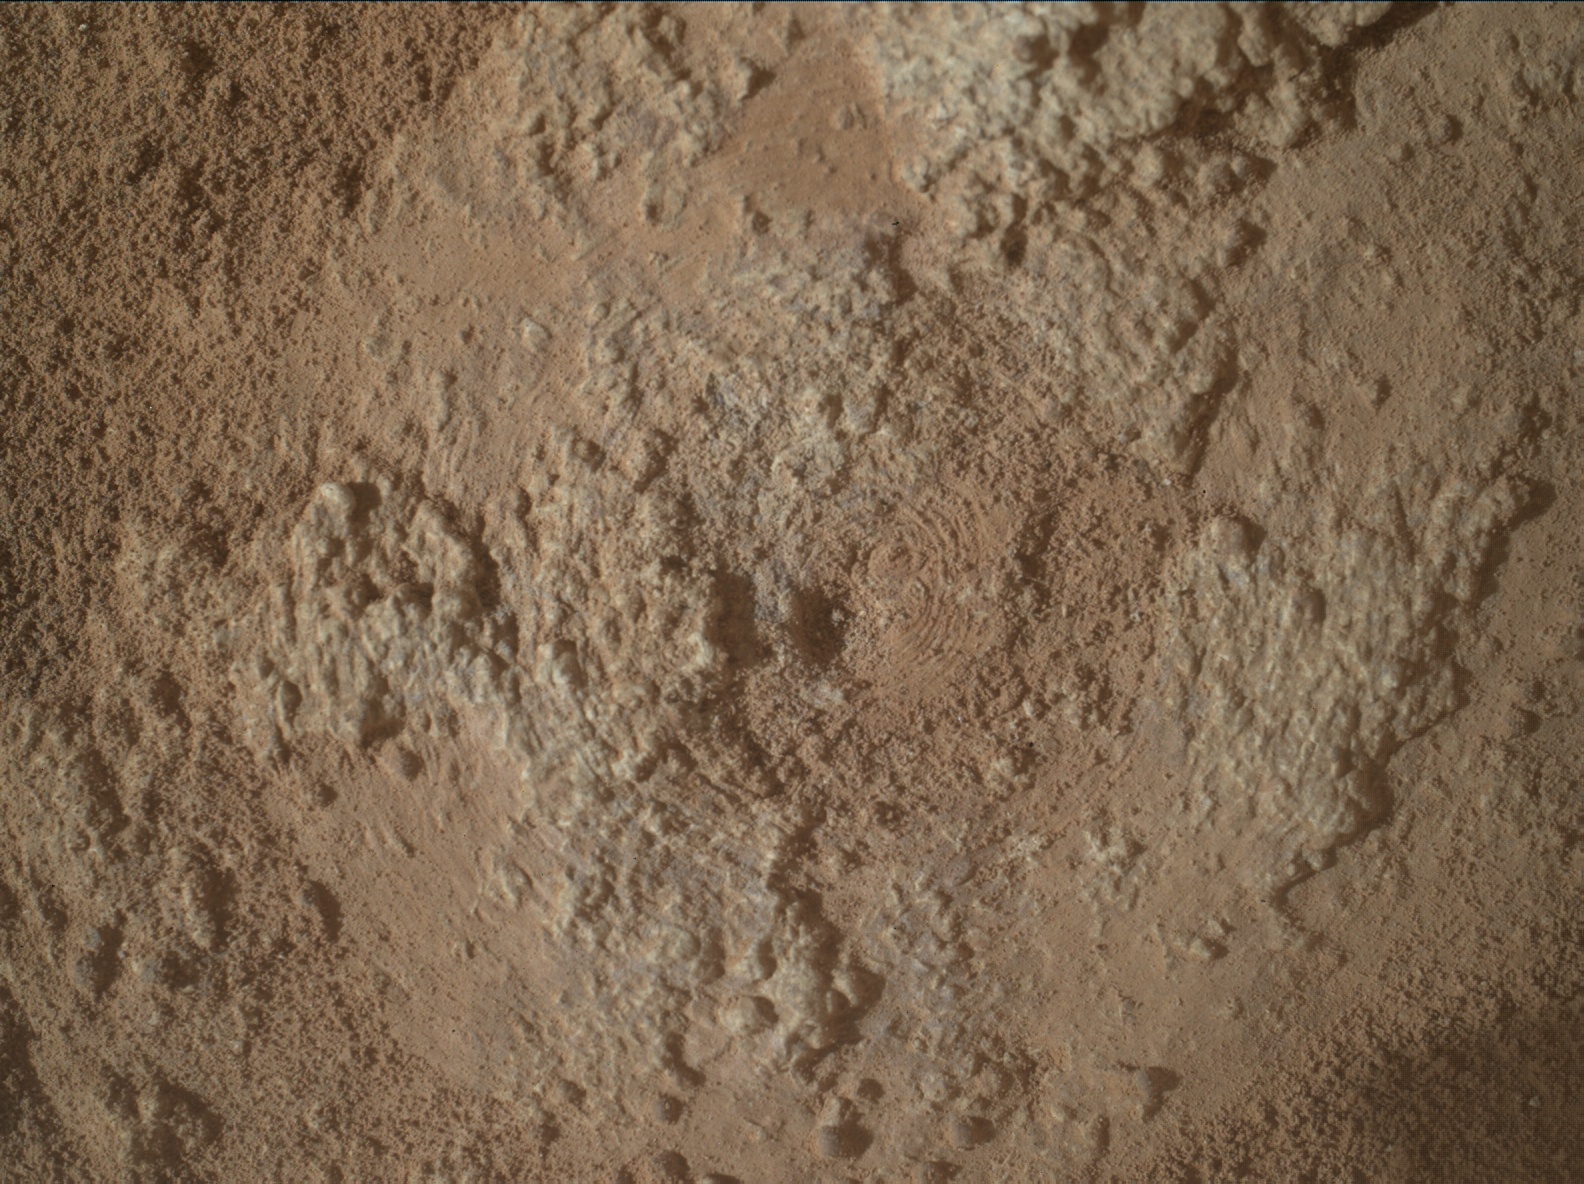 Nasa's Mars rover Curiosity acquired this image using its Mars Hand Lens Imager (MAHLI) on Sol 3705